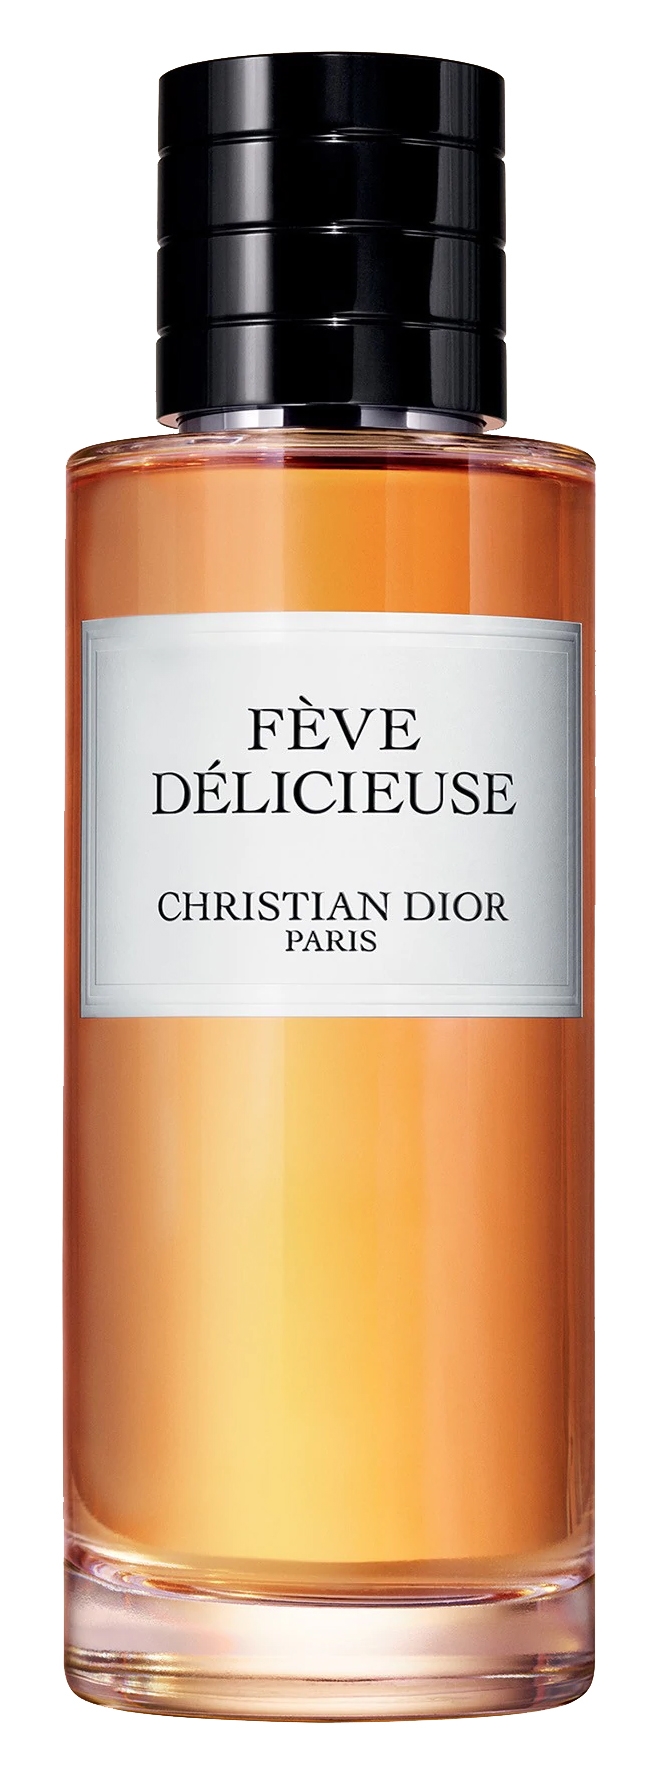 dior feve delicieuse price